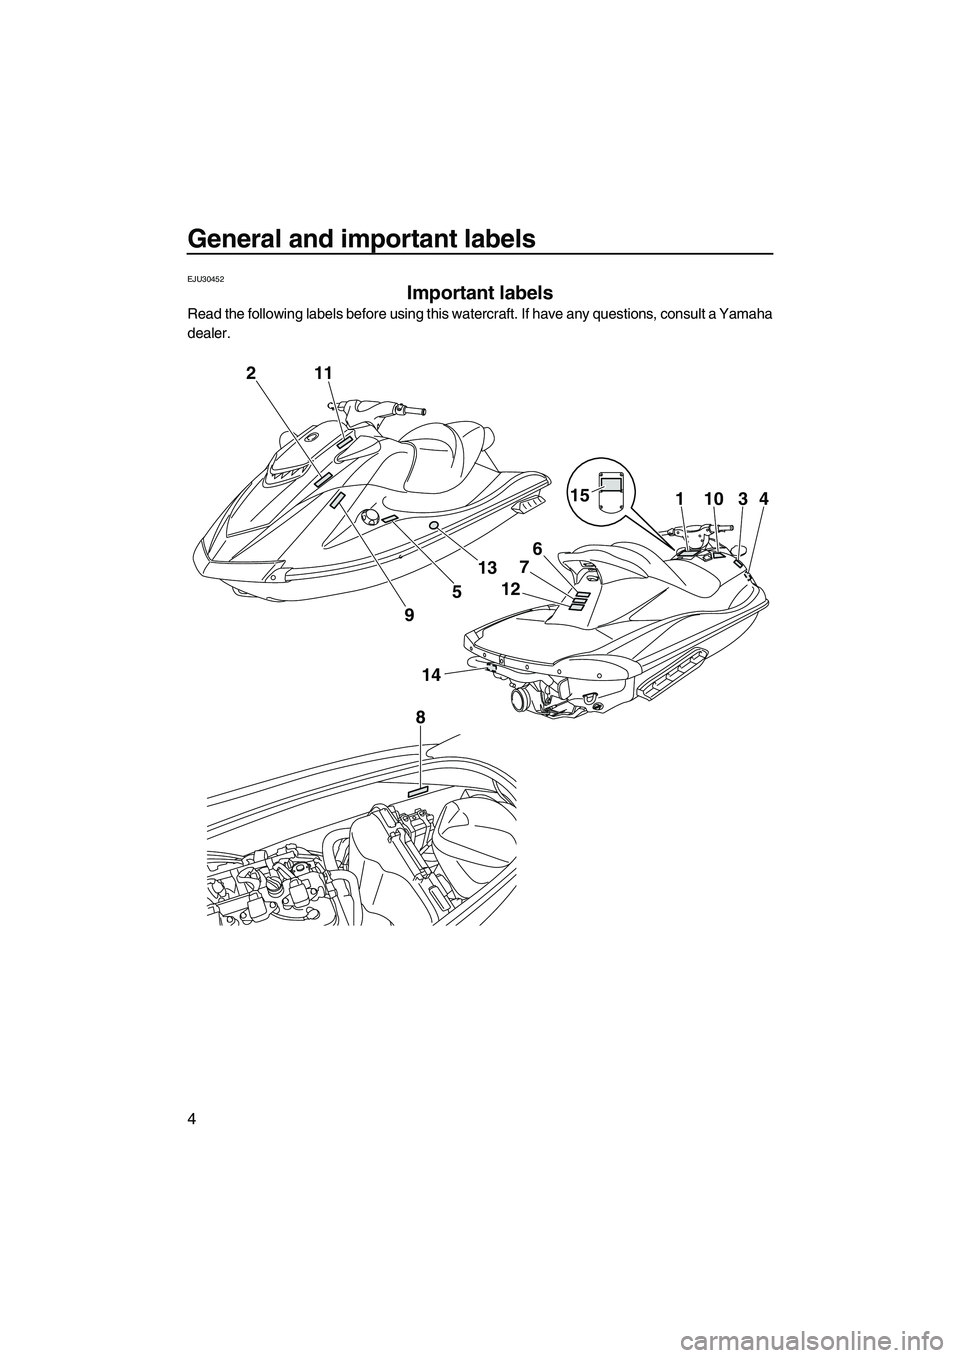 YAMAHA VXS 2013  Owners Manual General and important labels
4
EJU30452
Important labels 
Read the following labels before using this watercraft. If have any questions, consult a Yamaha
dealer.
2
14
8
15
6
7
12
11034
11
9
5
13
UF2M7